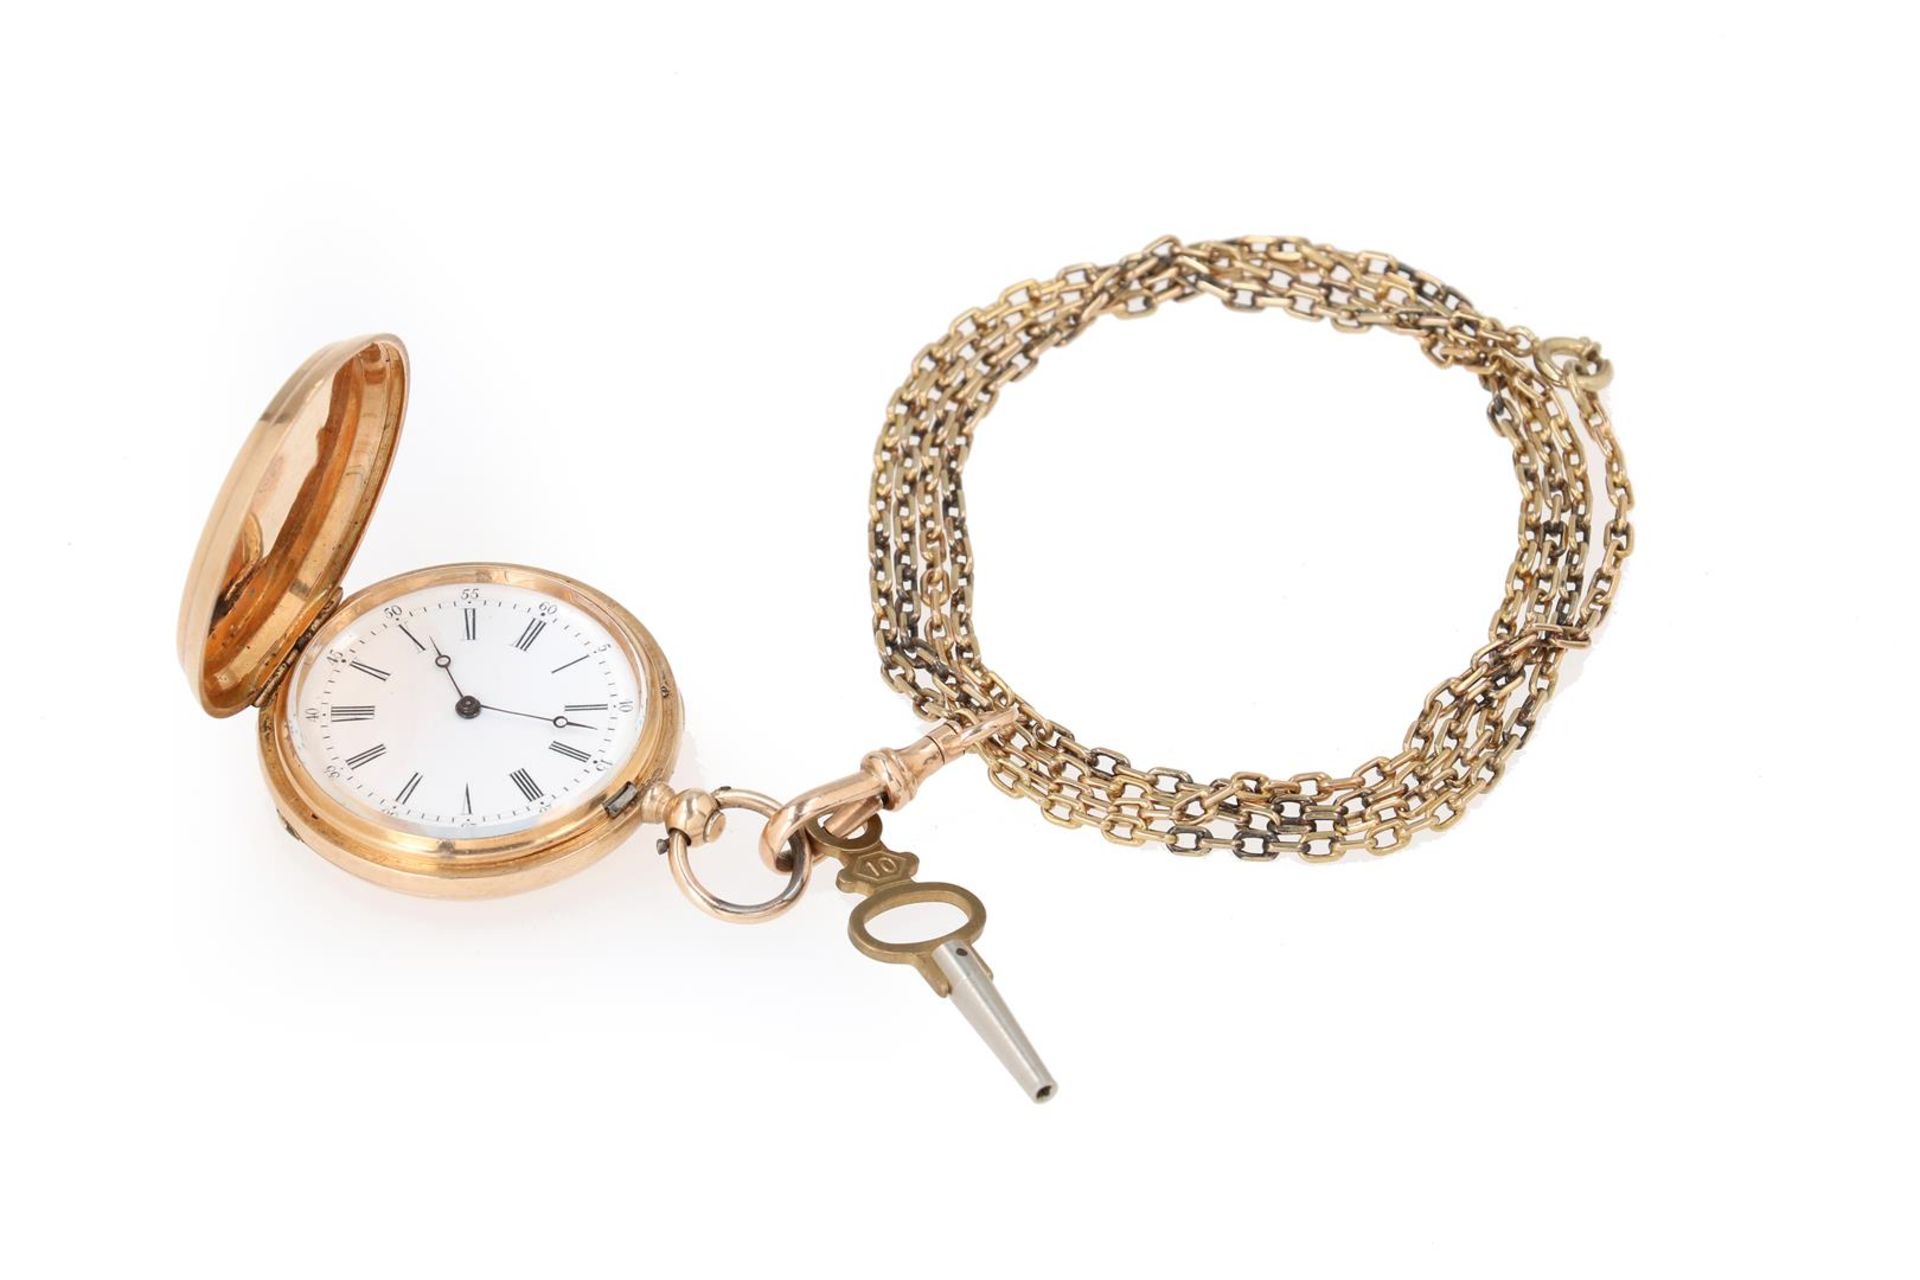 A 14-kt gold ladies remontoir pocket watch on a gold chain, Peret et fils, the engraved case with mo - Image 3 of 9